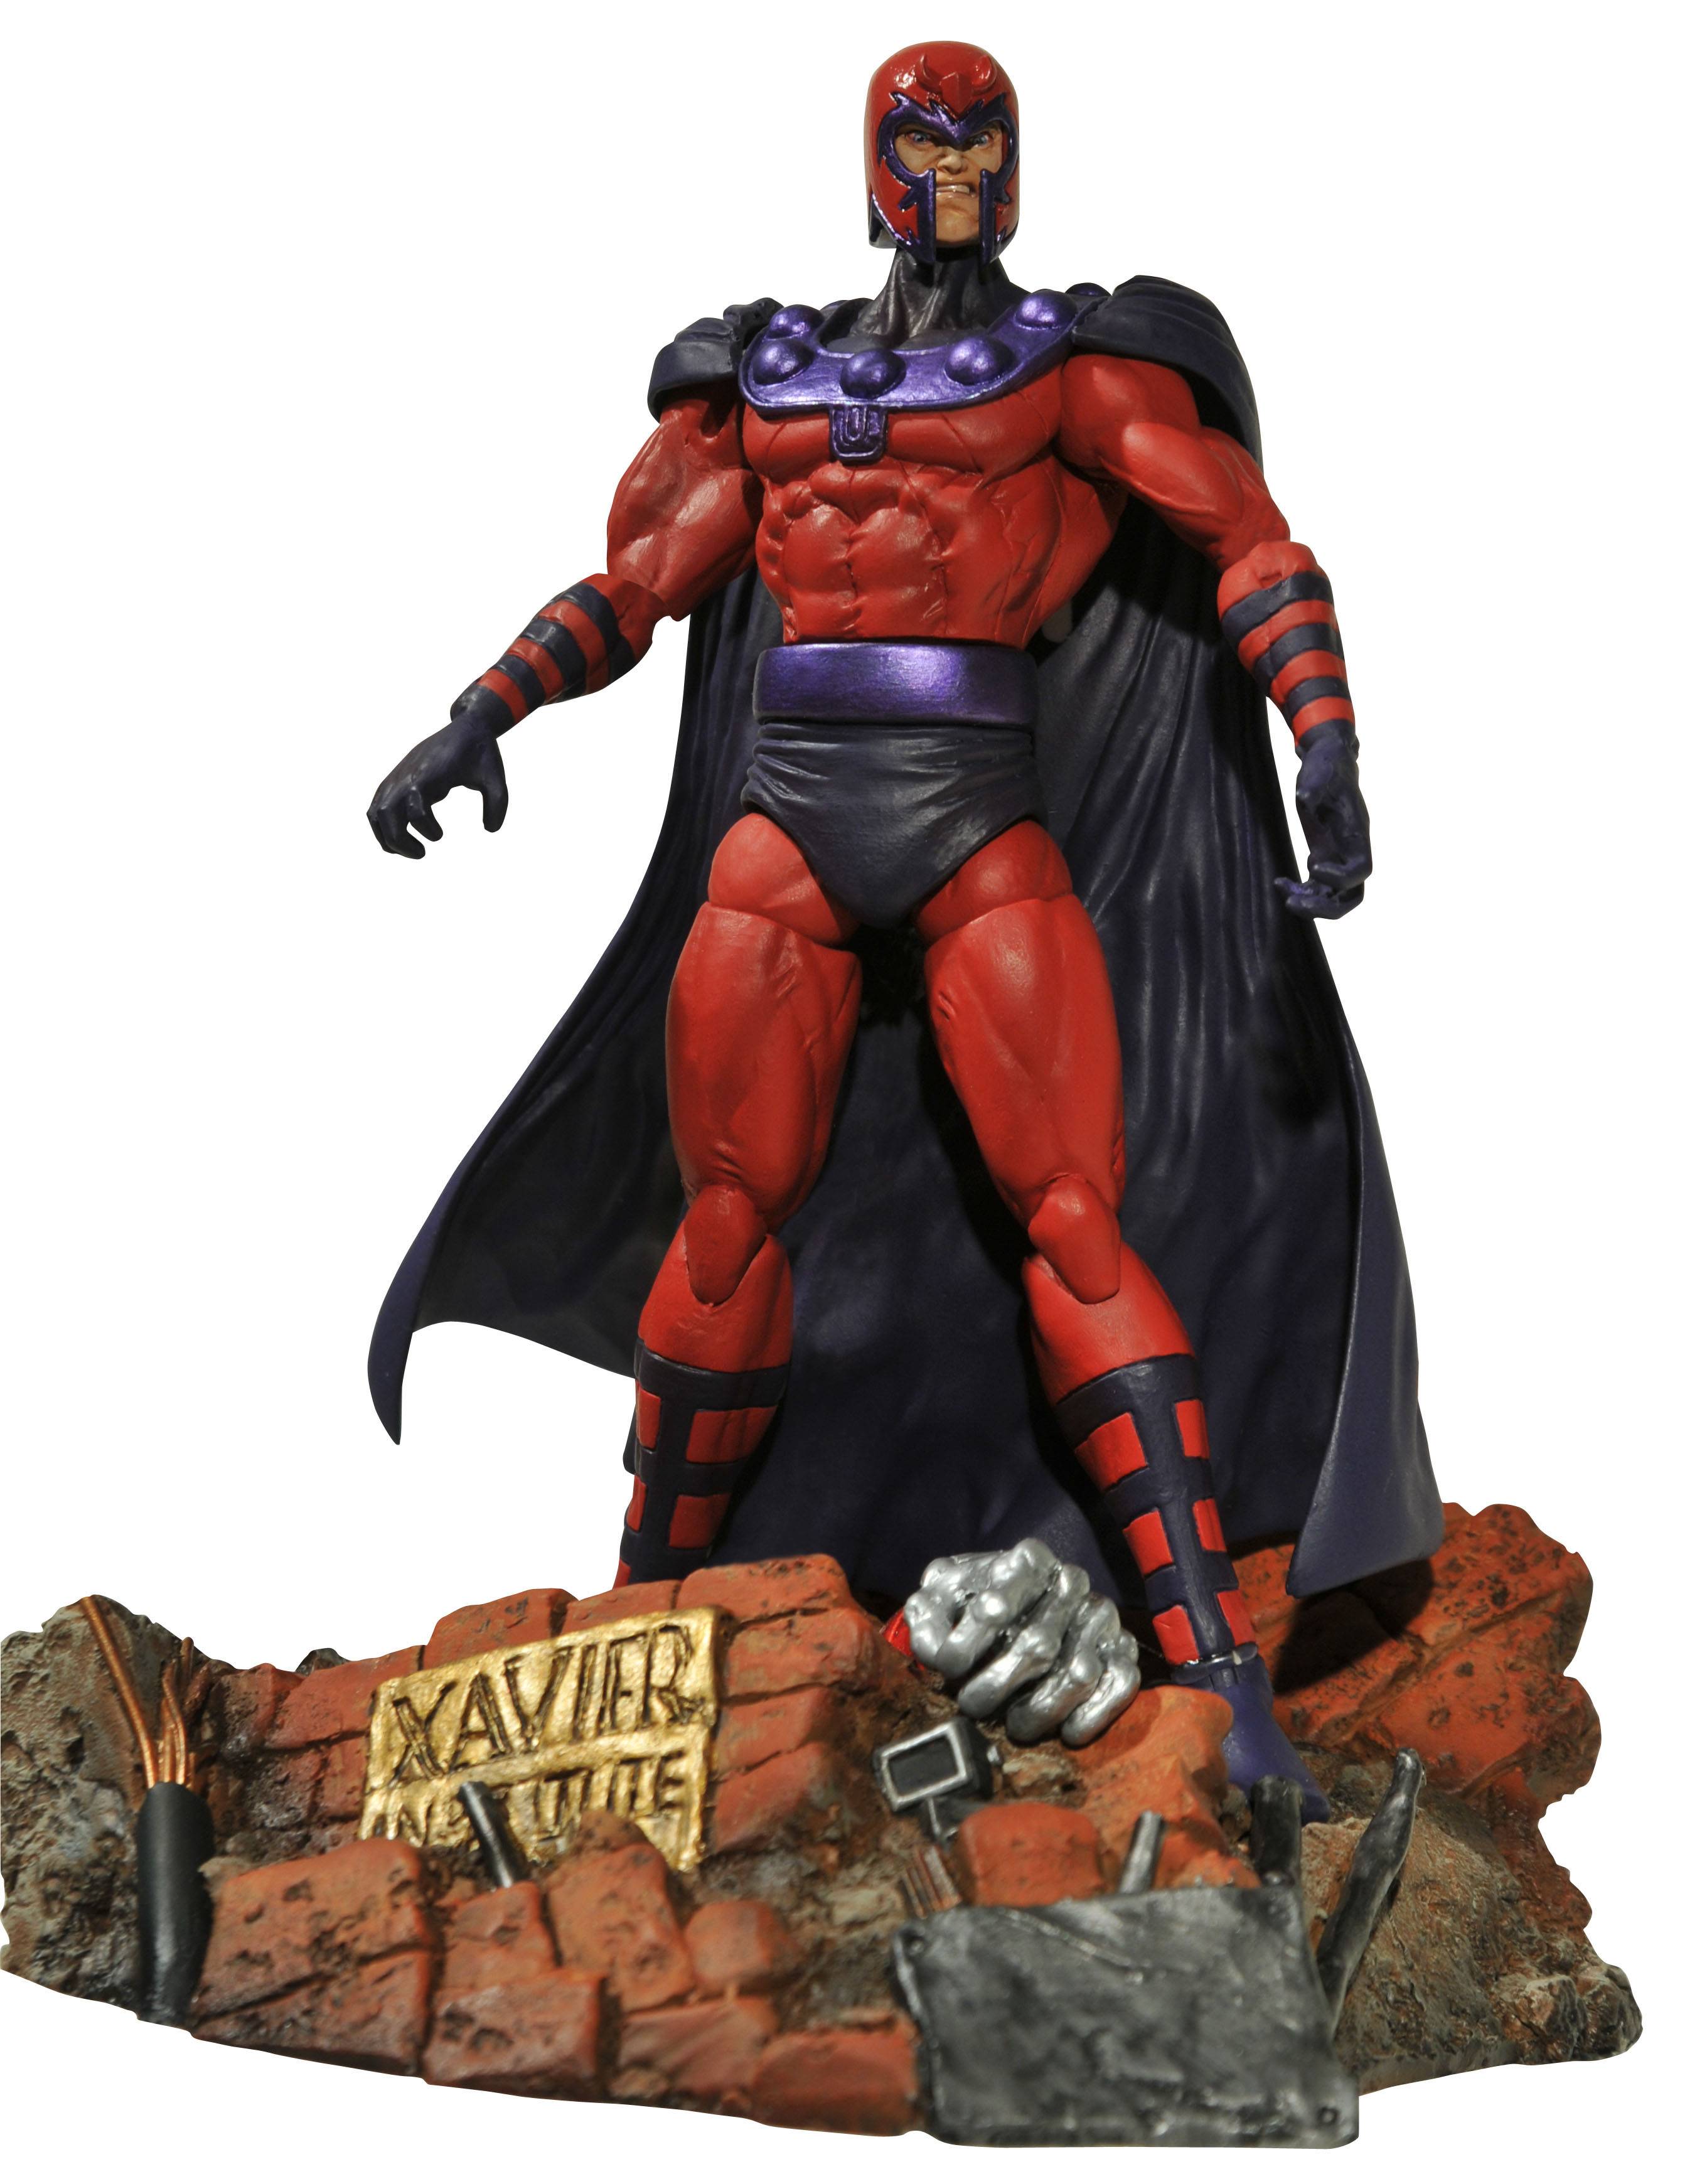 Marvel Select Magneto Action Figure